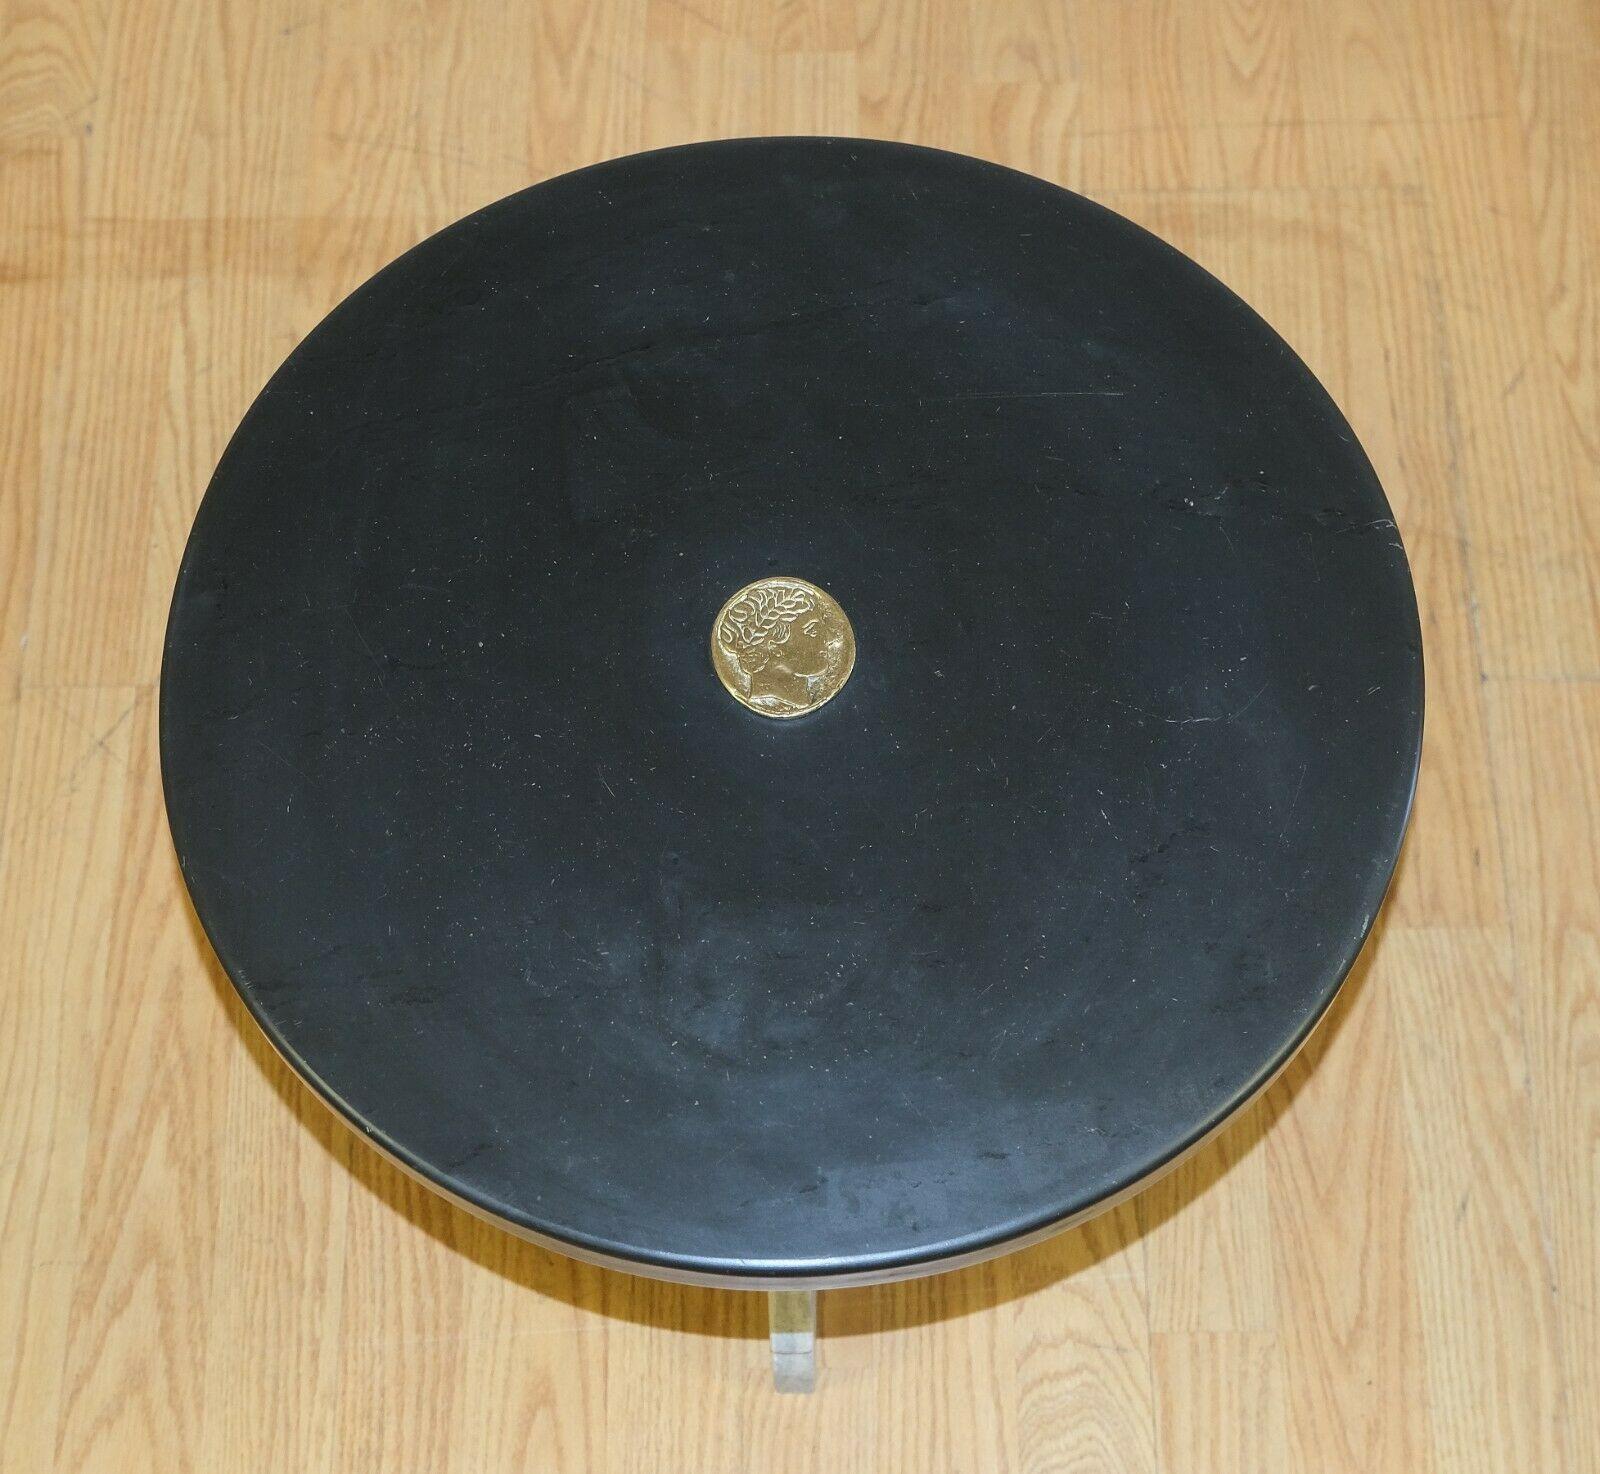 Art Deco Charming Marble Low, Occasional Circular Black Top Table & Roman Head Crest